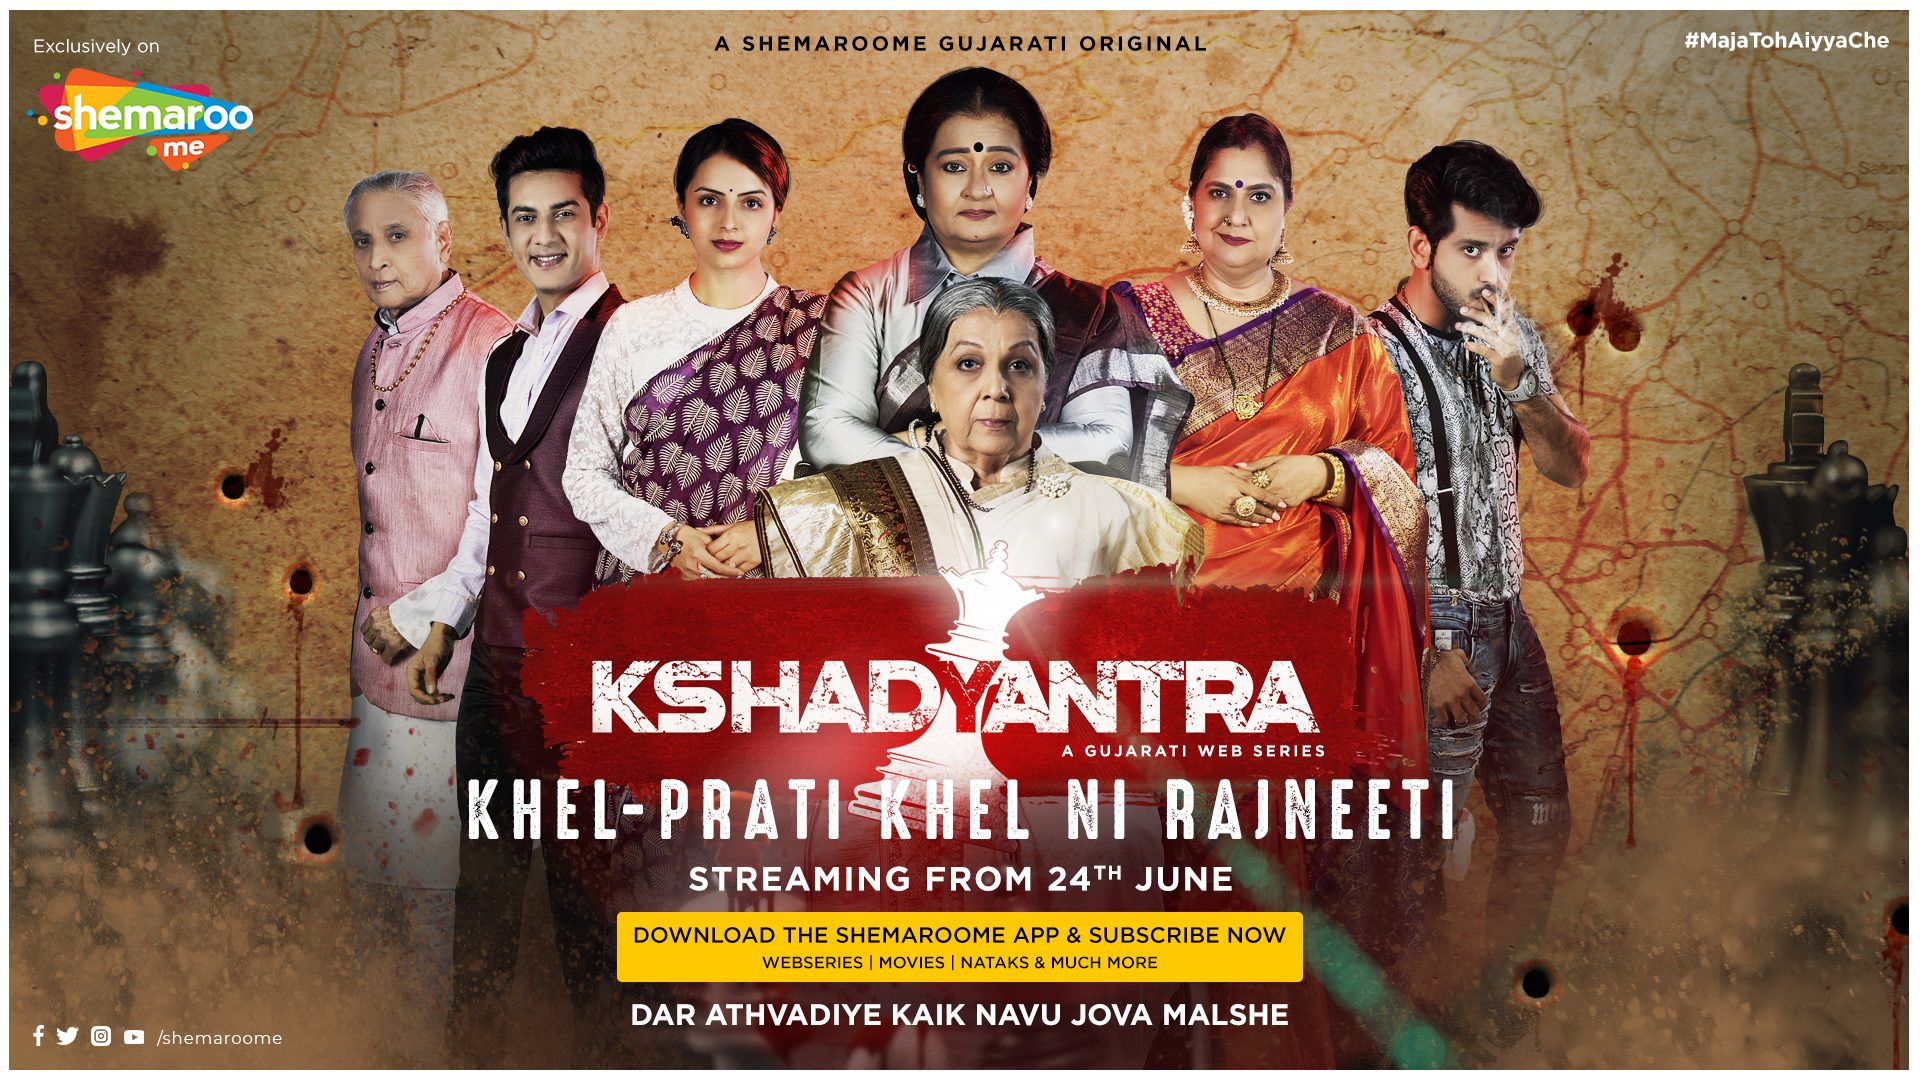 ShemarooMe all set to launch yet another Gujarati web series ‘Kshadyantra’ decoding=